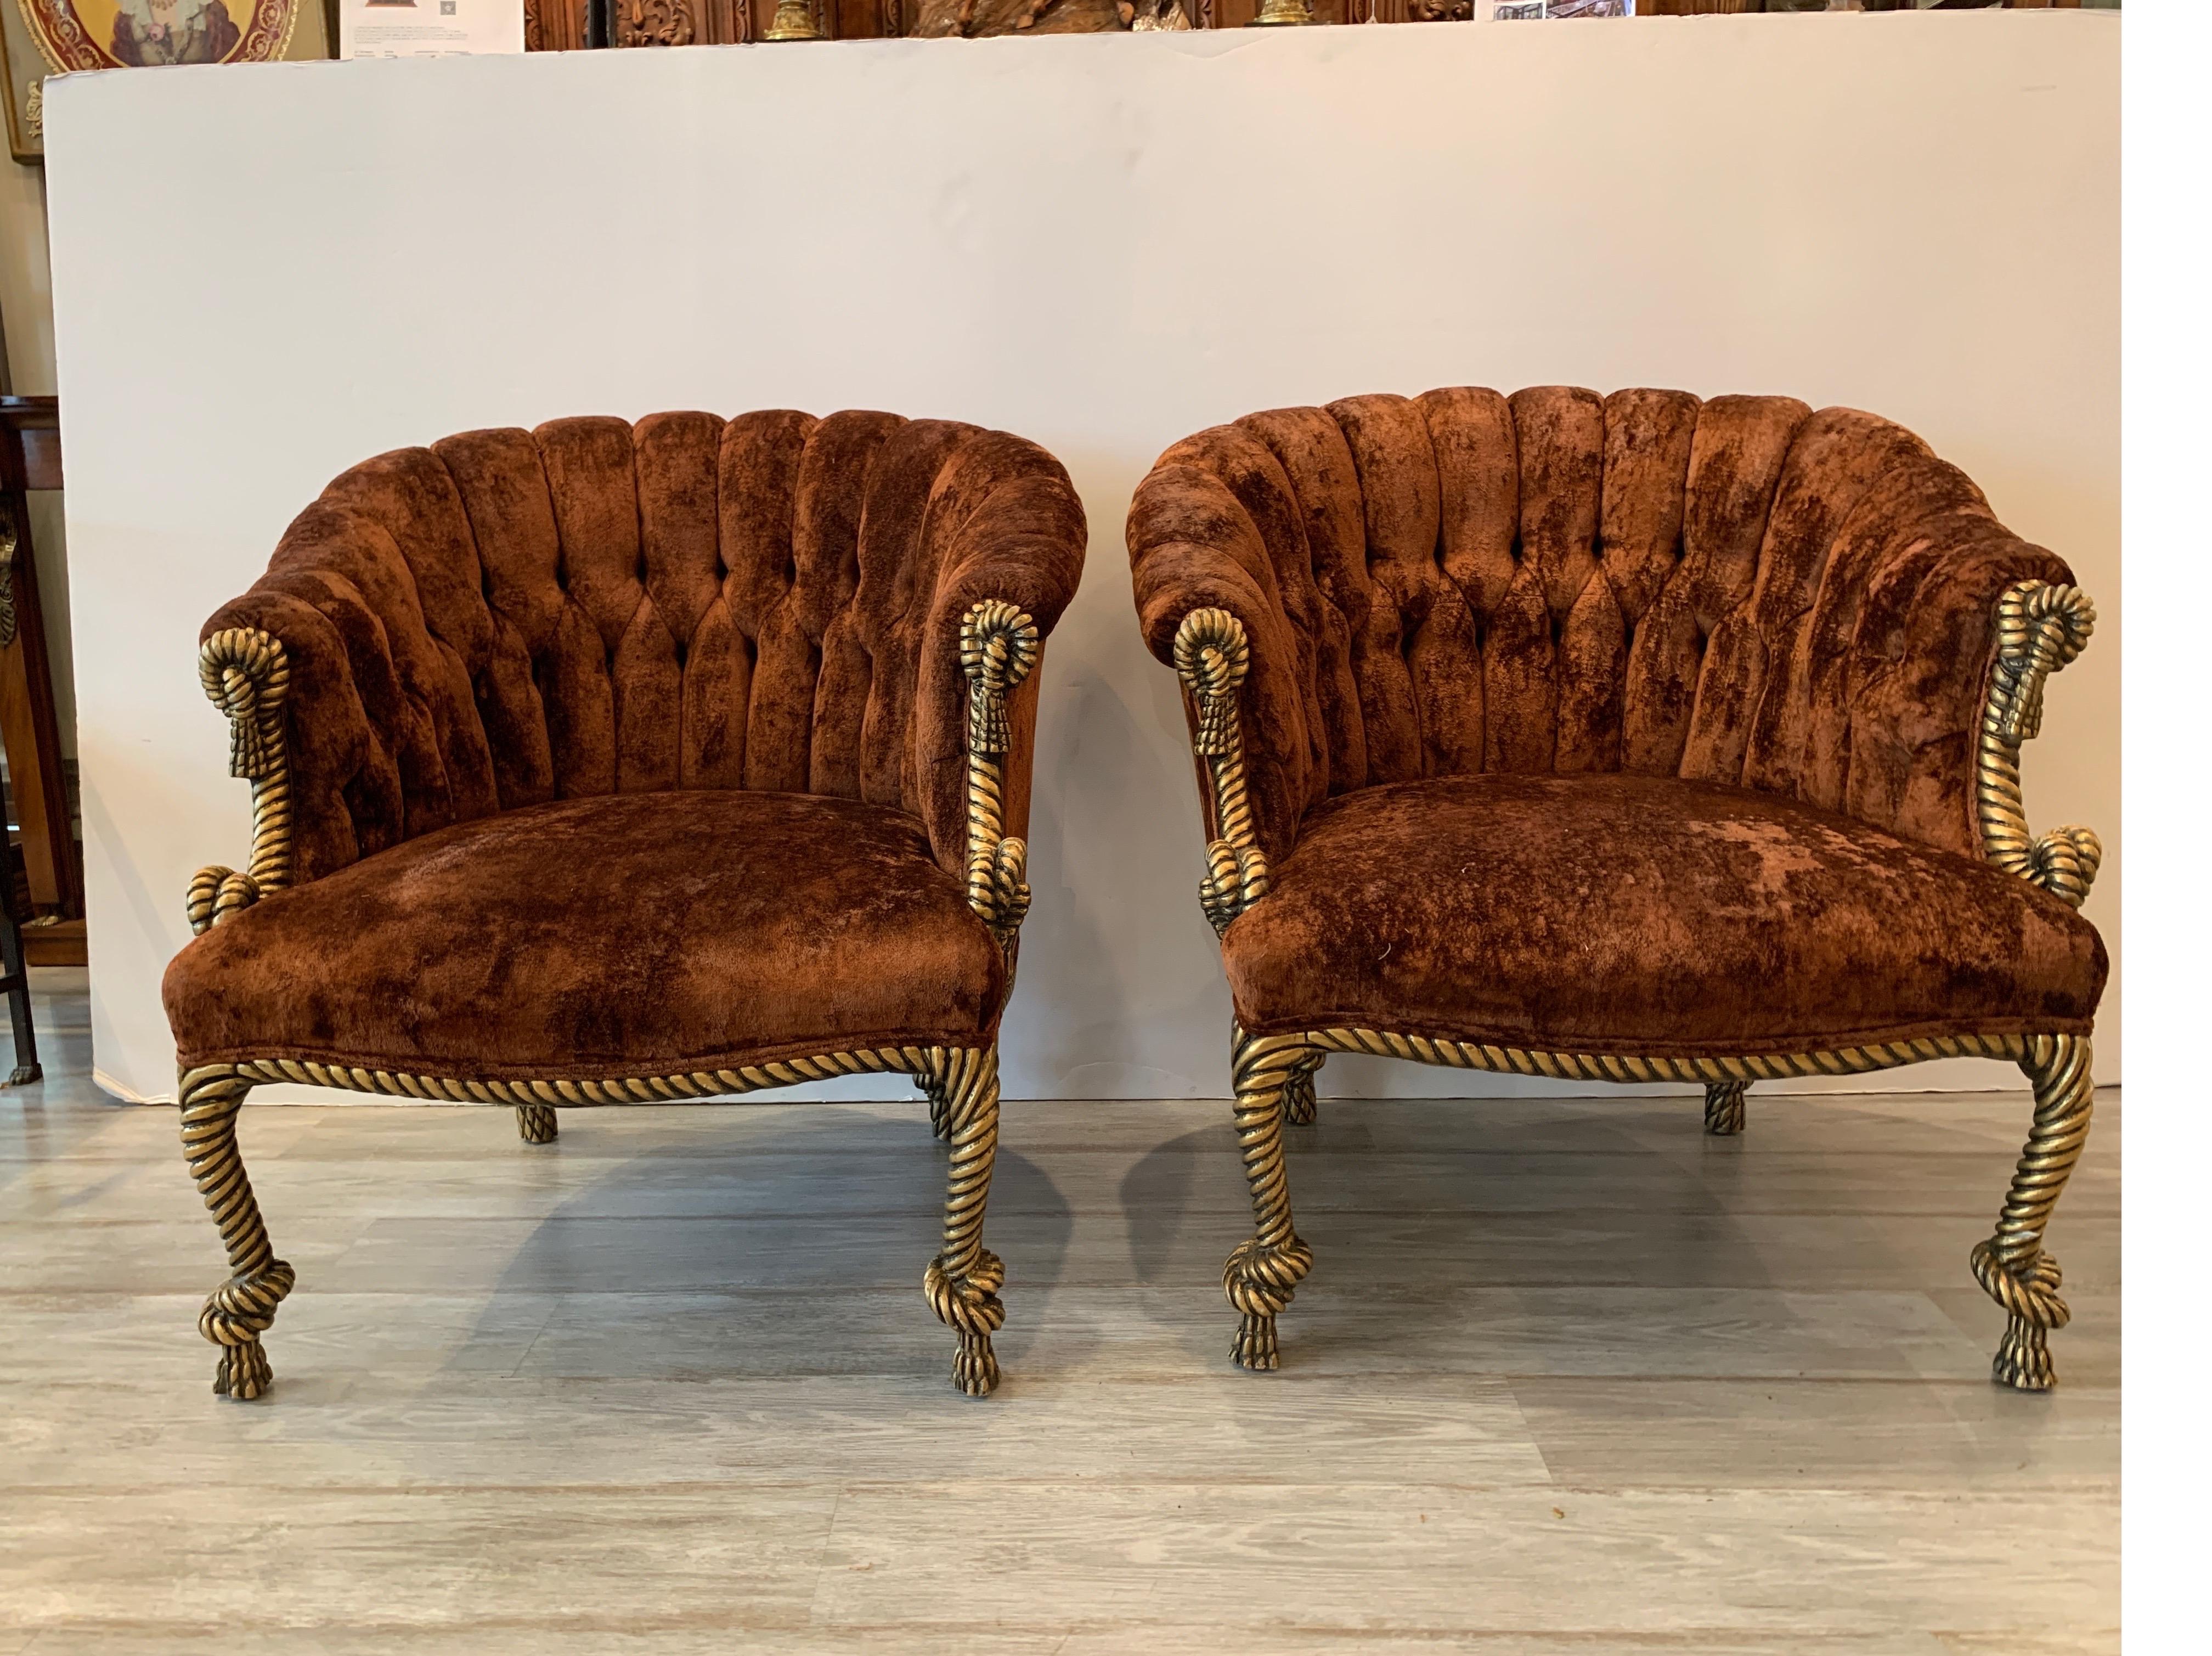 Lovely pair of 1960s Hollywood Regency barrel back armchairs with carved wood rope and tassel motif. The gilt frames with original iron rust red velvet covering. The fabric in good shape but would recommend reupholstering.